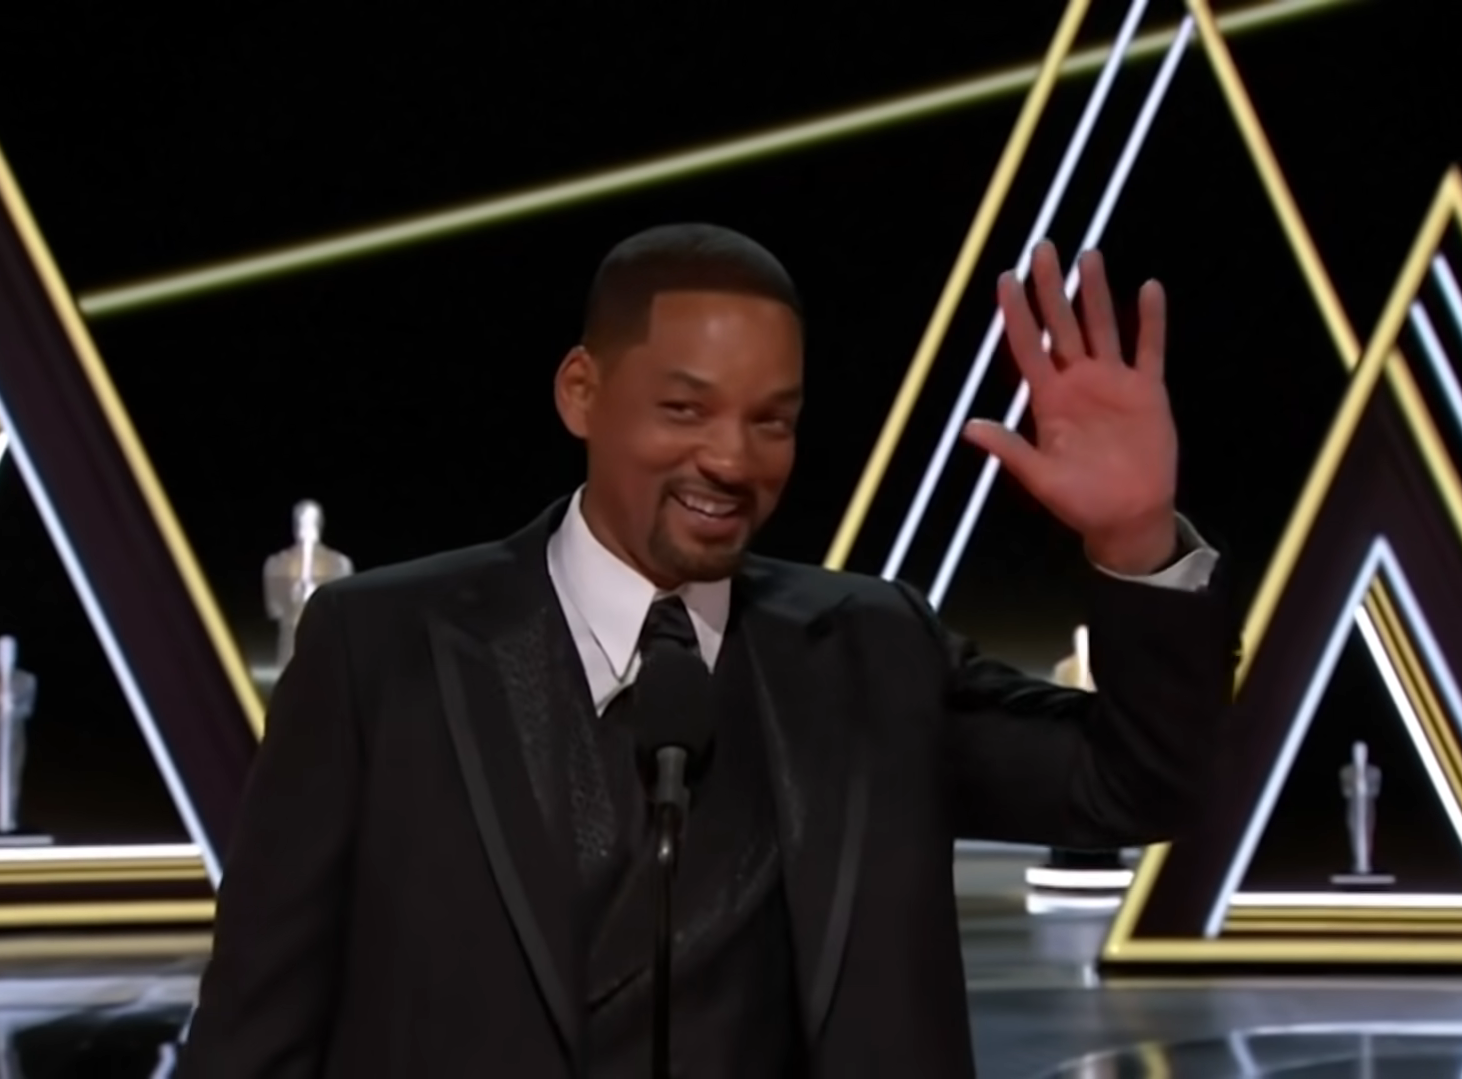 Film Academy condemns Will Smith's assault at the 2022 Oscars